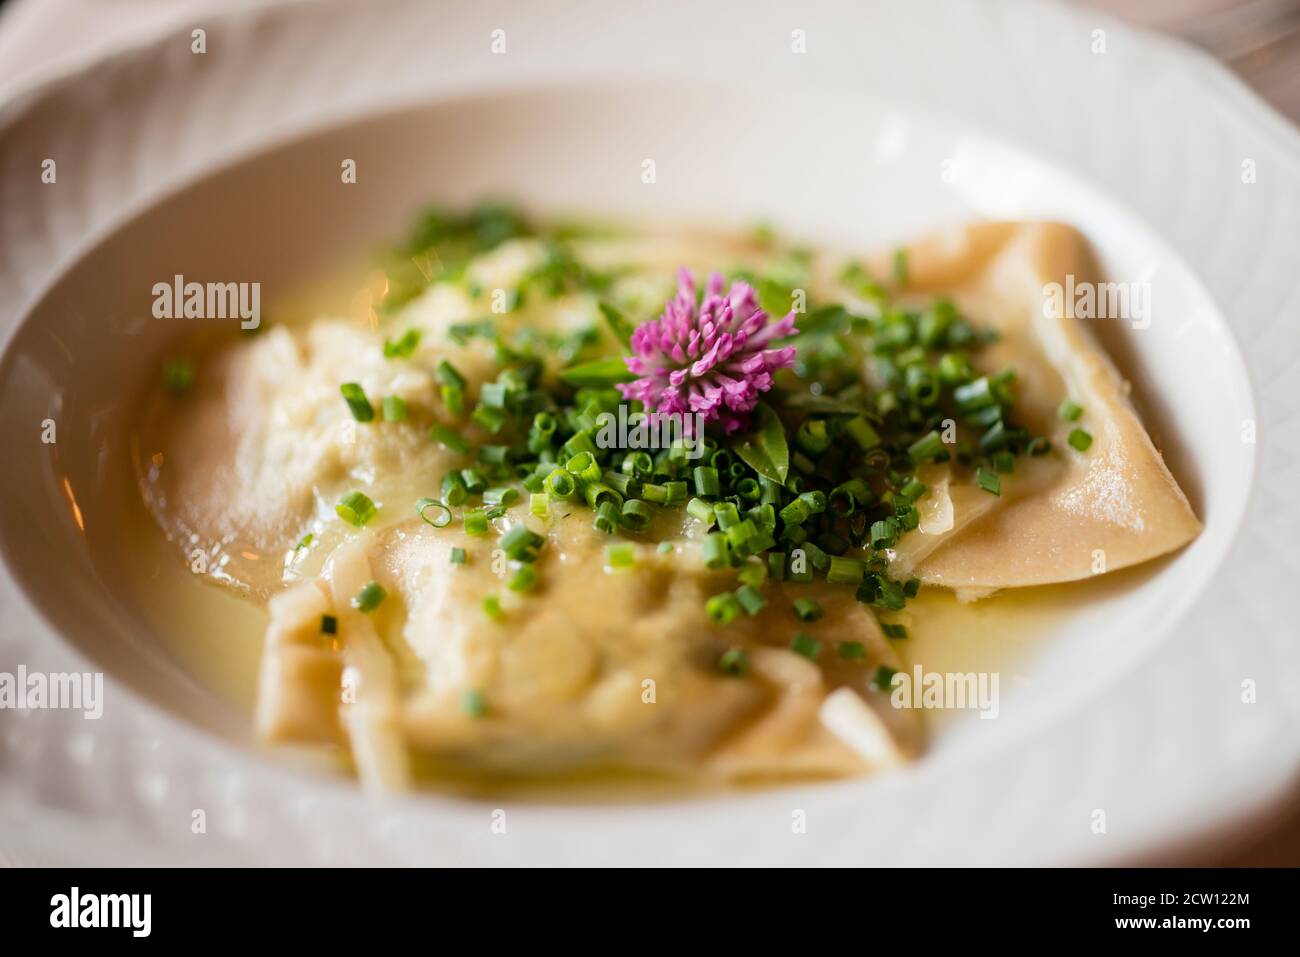 Bowl of traditional Italian Tortelli pasta stuffed with vegetables. Stock Photo